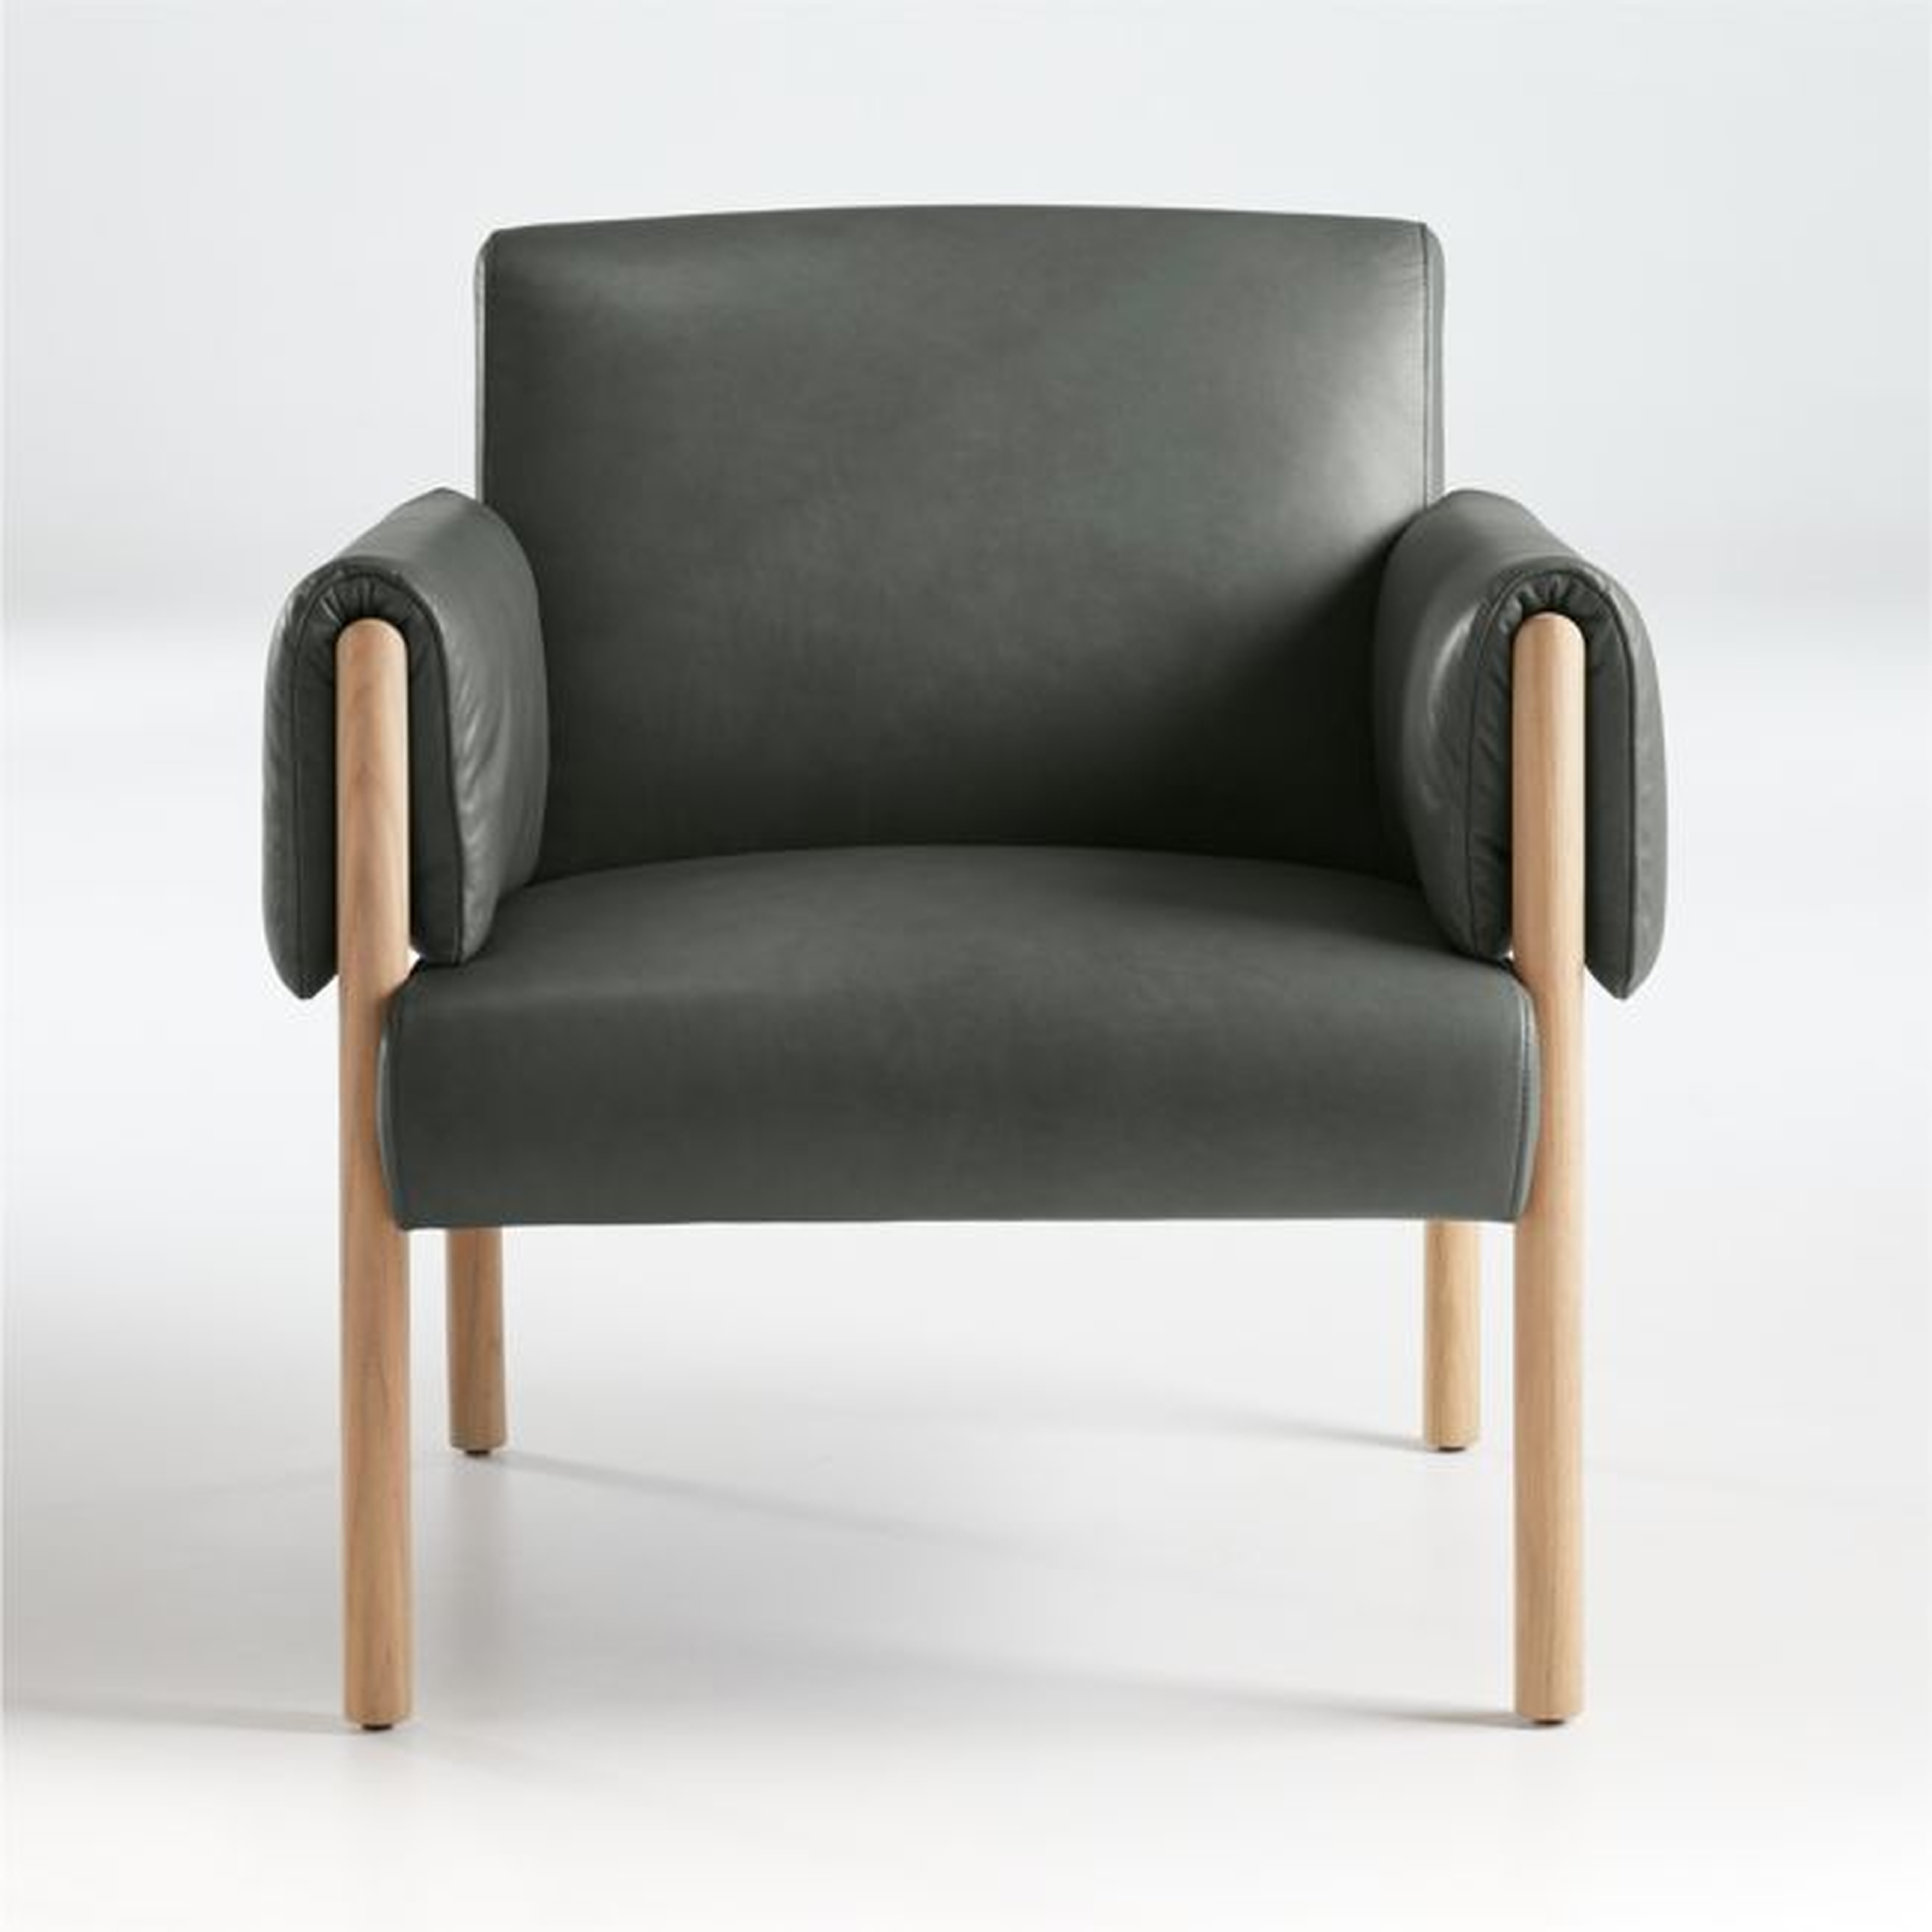 Diderot Wood and Leather Chair - Crate and Barrel